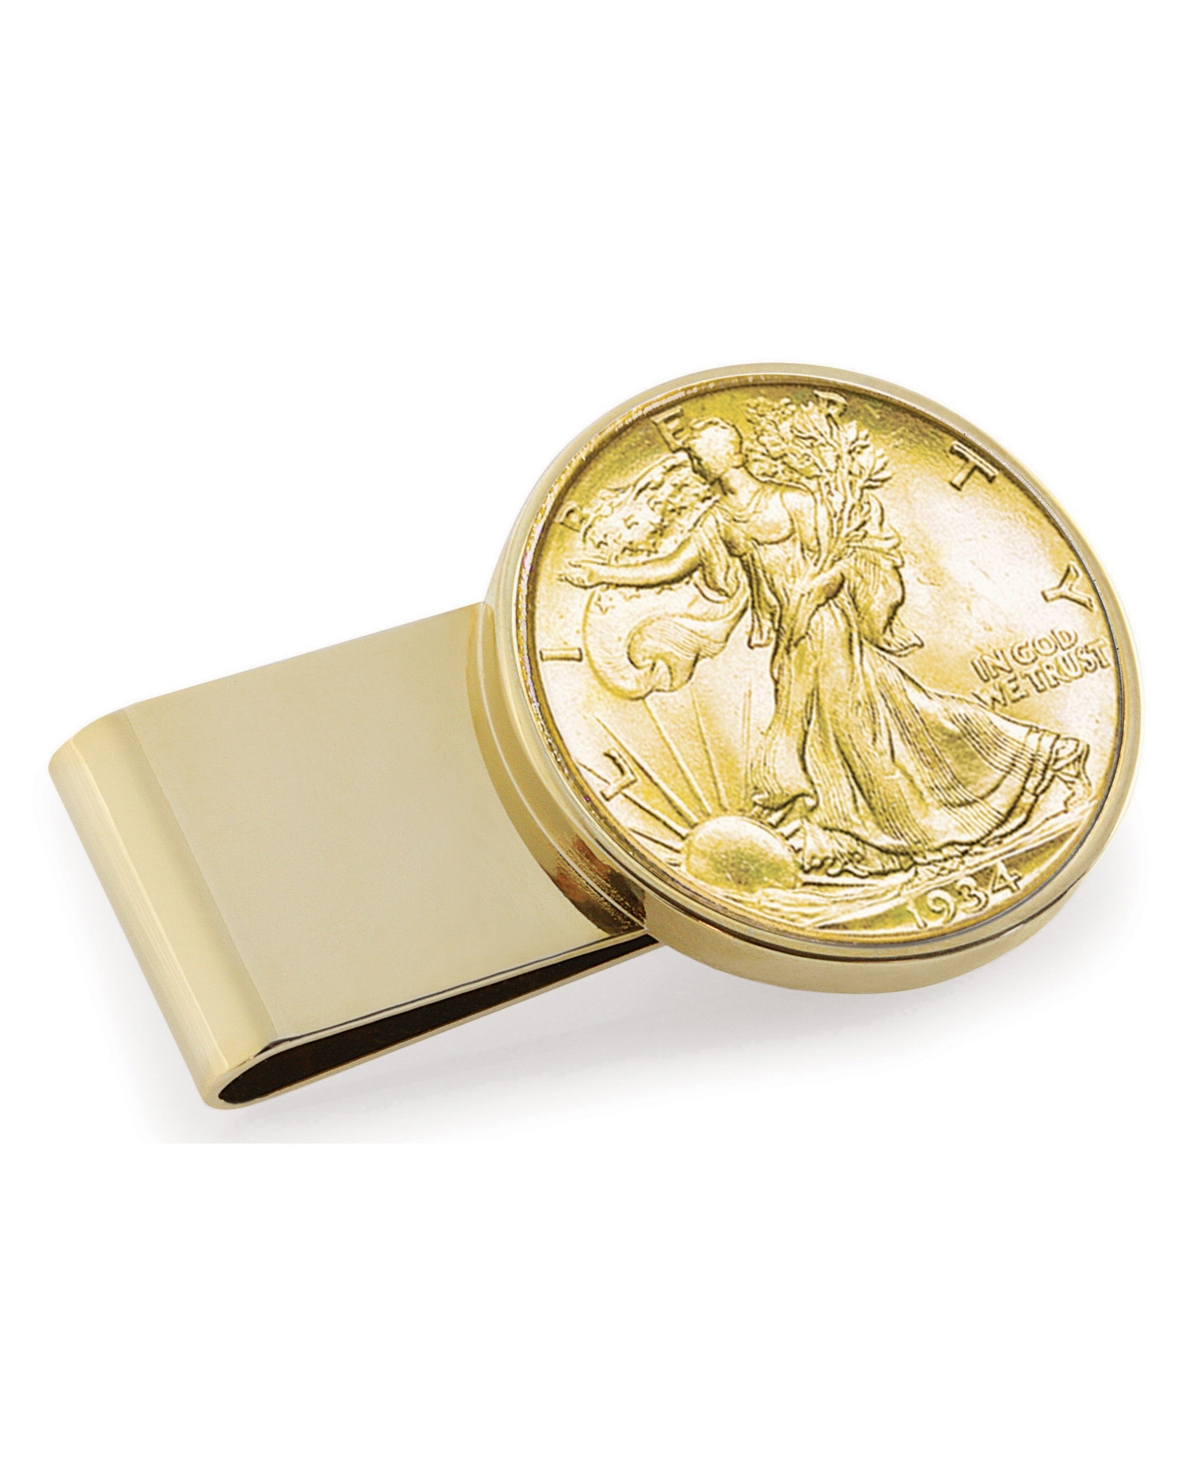 Men's American Coin Treasures Gold-Layered Silver Walking Liberty Half Dollar Stainless Steel Coin Money Clip - Gold